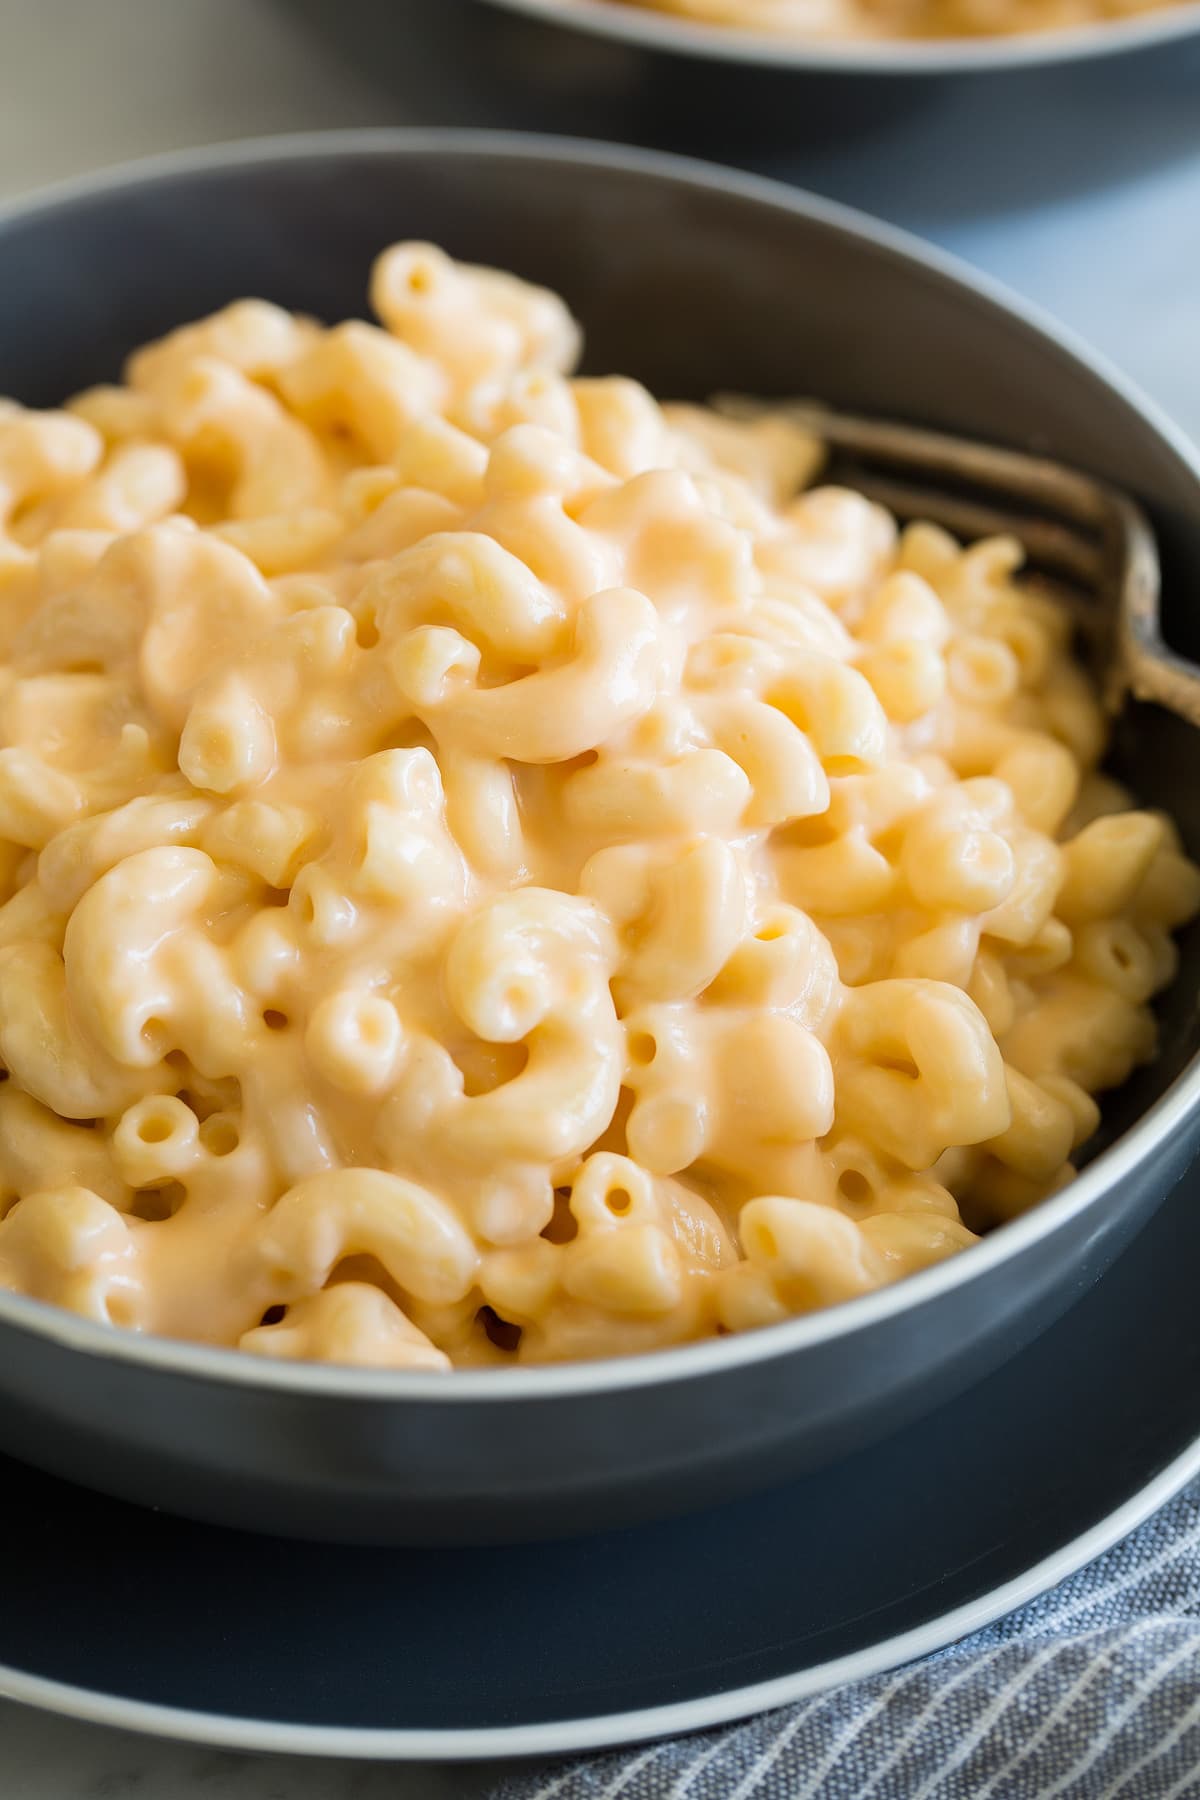 This is how your mac n' cheese should end up looking like!